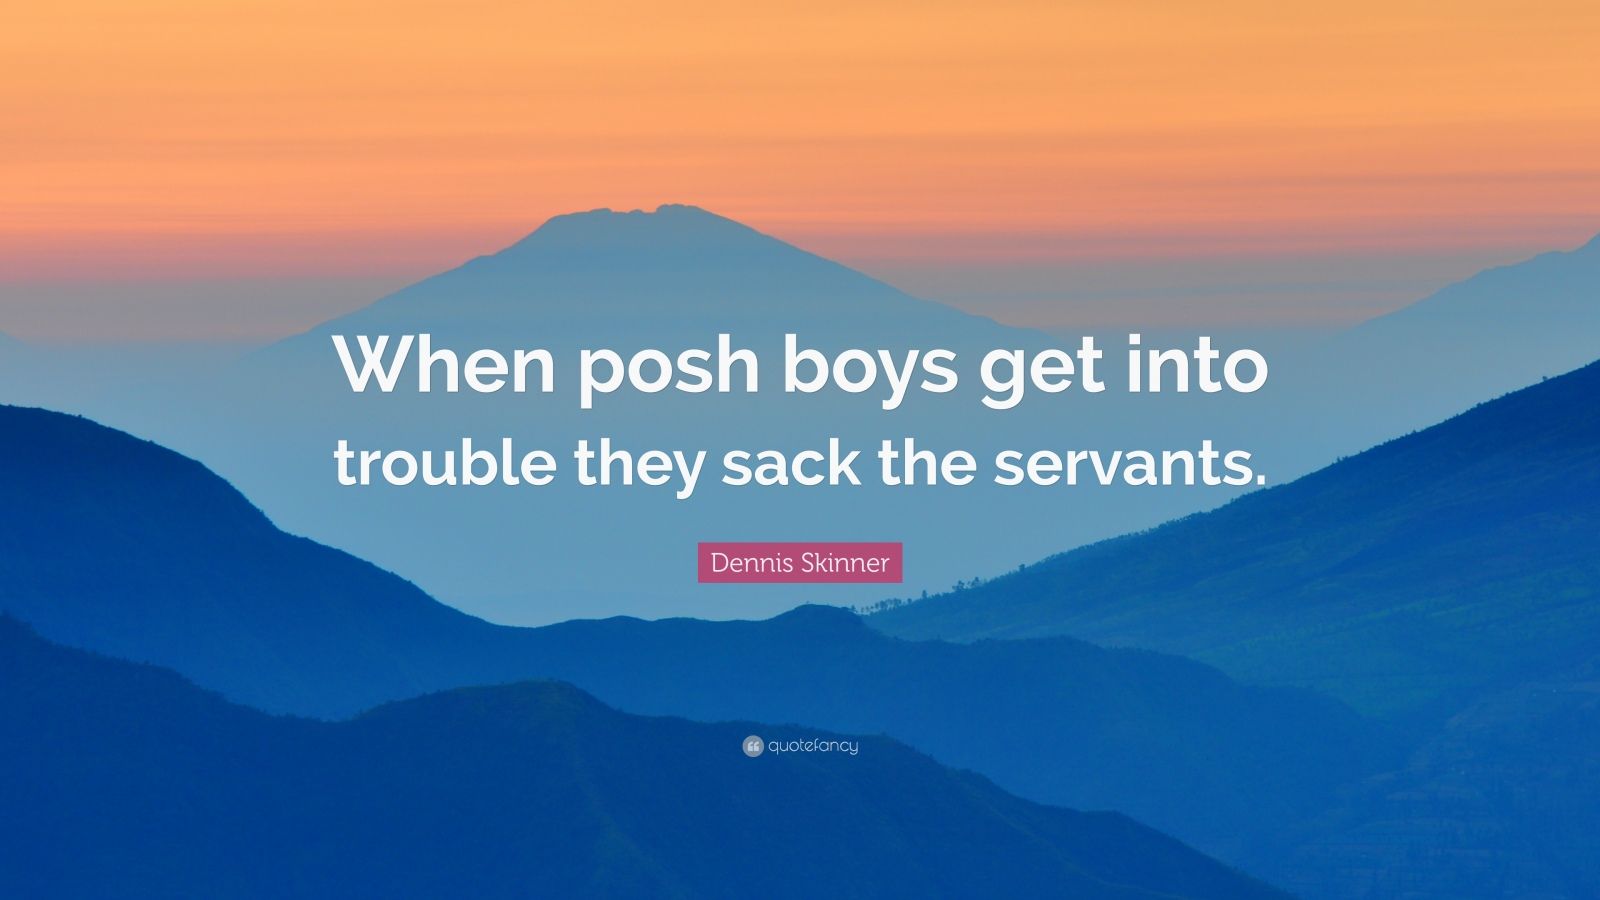 Dennis Skinner Quote: “When posh boys get into trouble they sack the